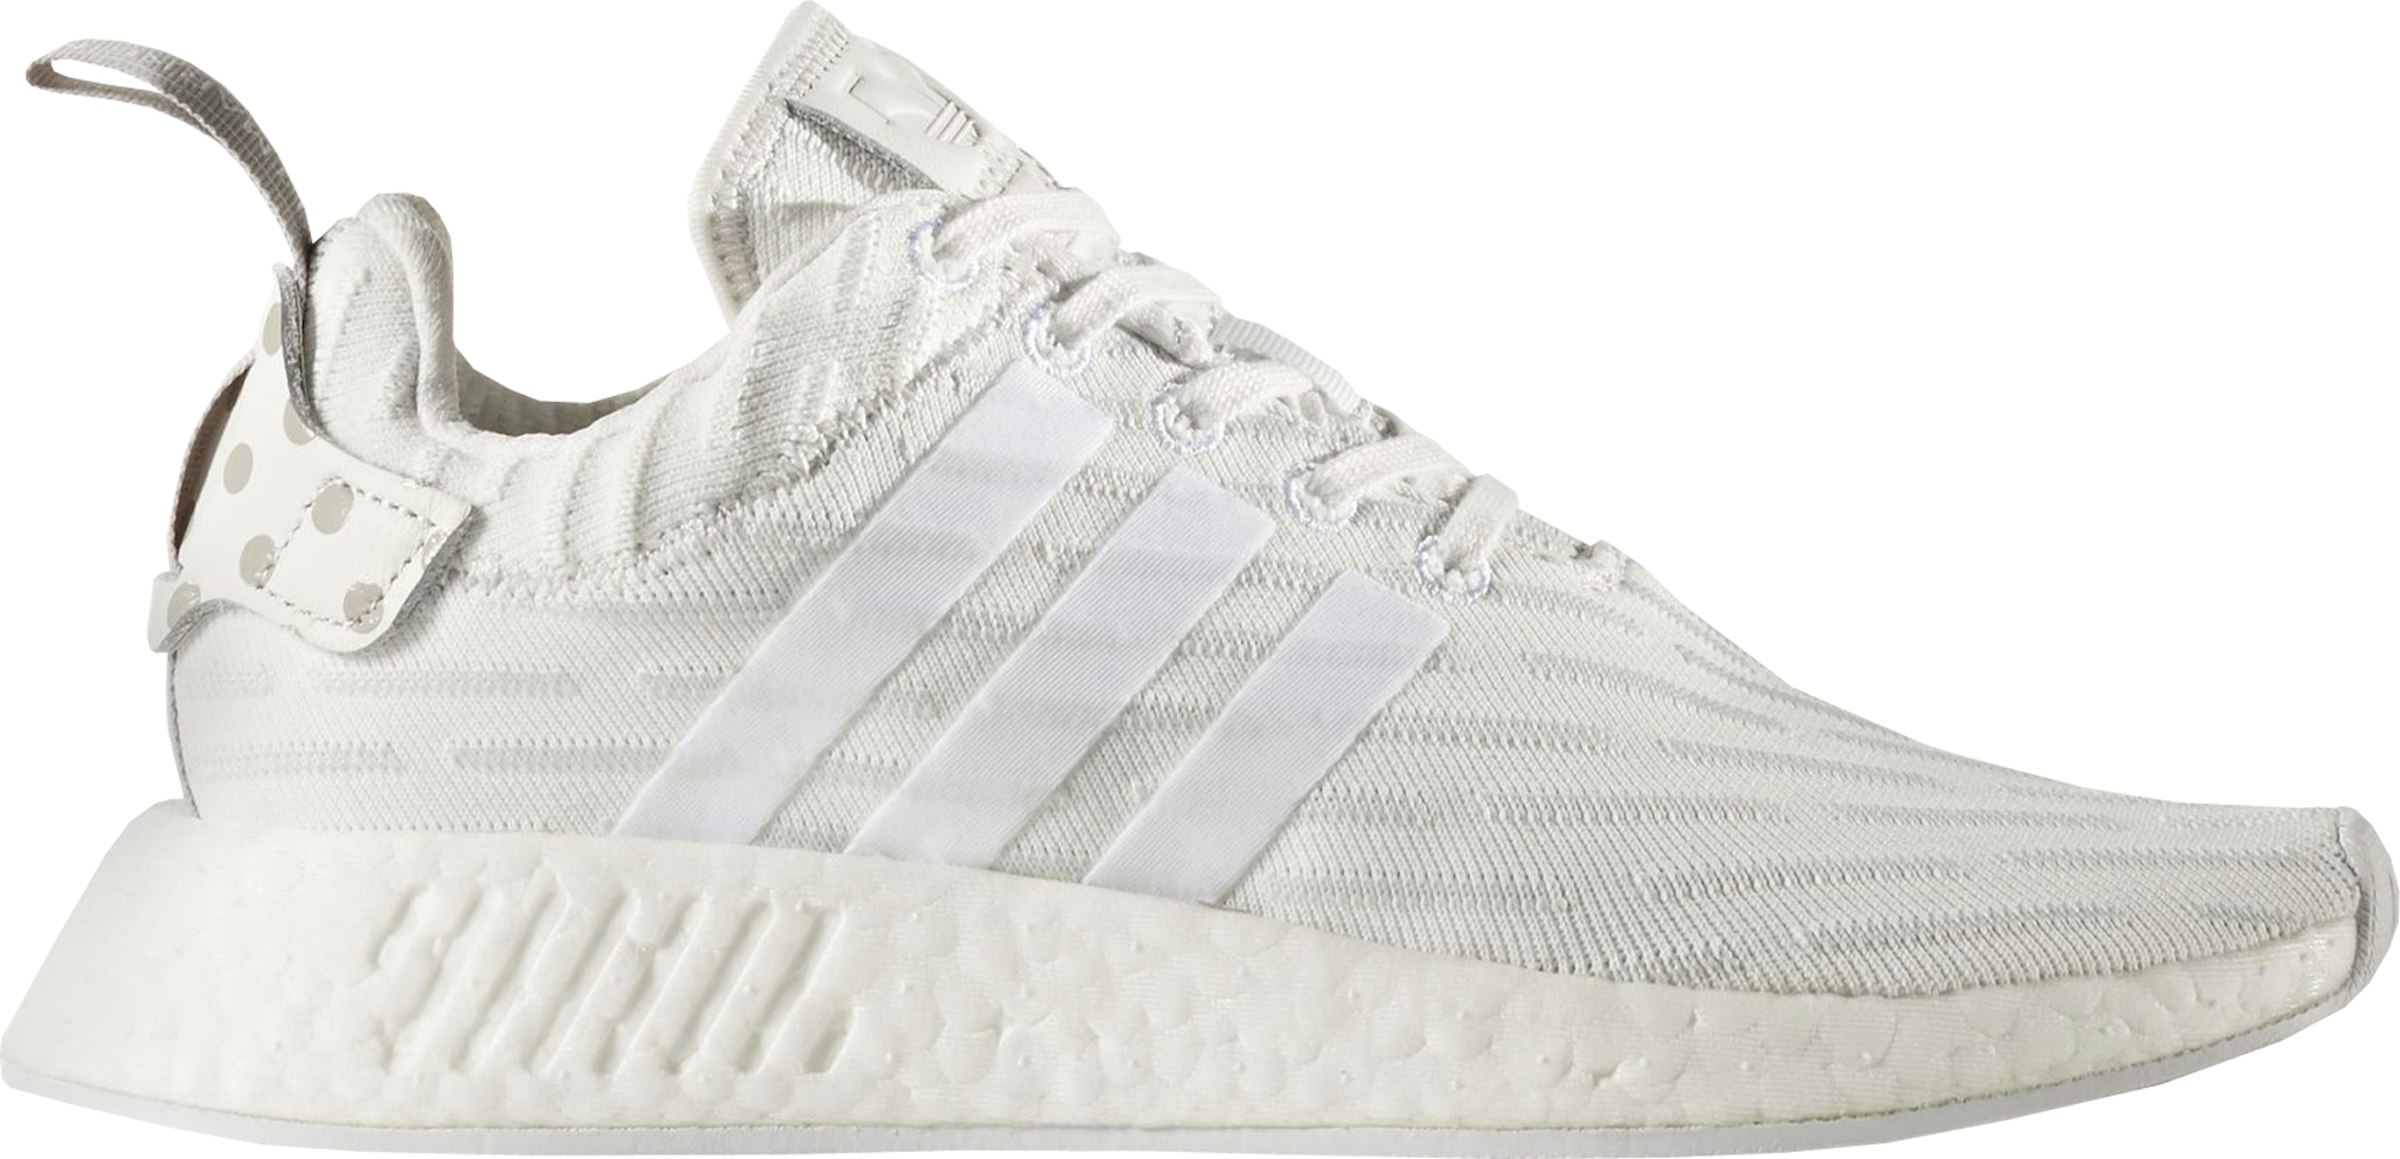 adidas NMD R2 Vintage White (Women's) BY2245 -